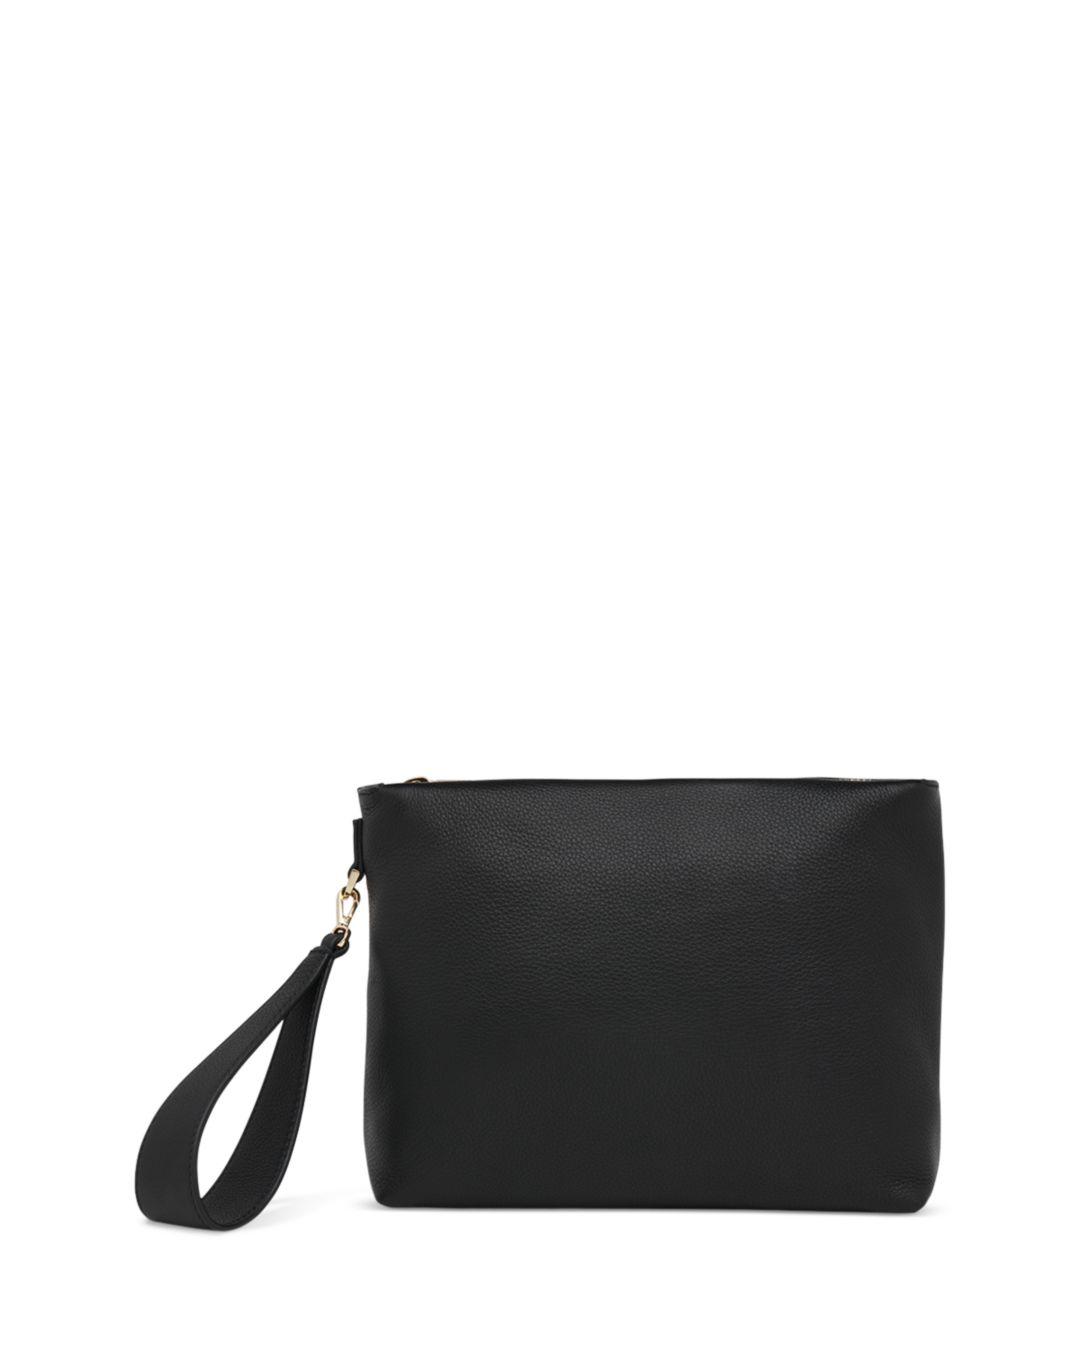 Whistles Avah Leather Zip Top Clutch in Black | Lyst